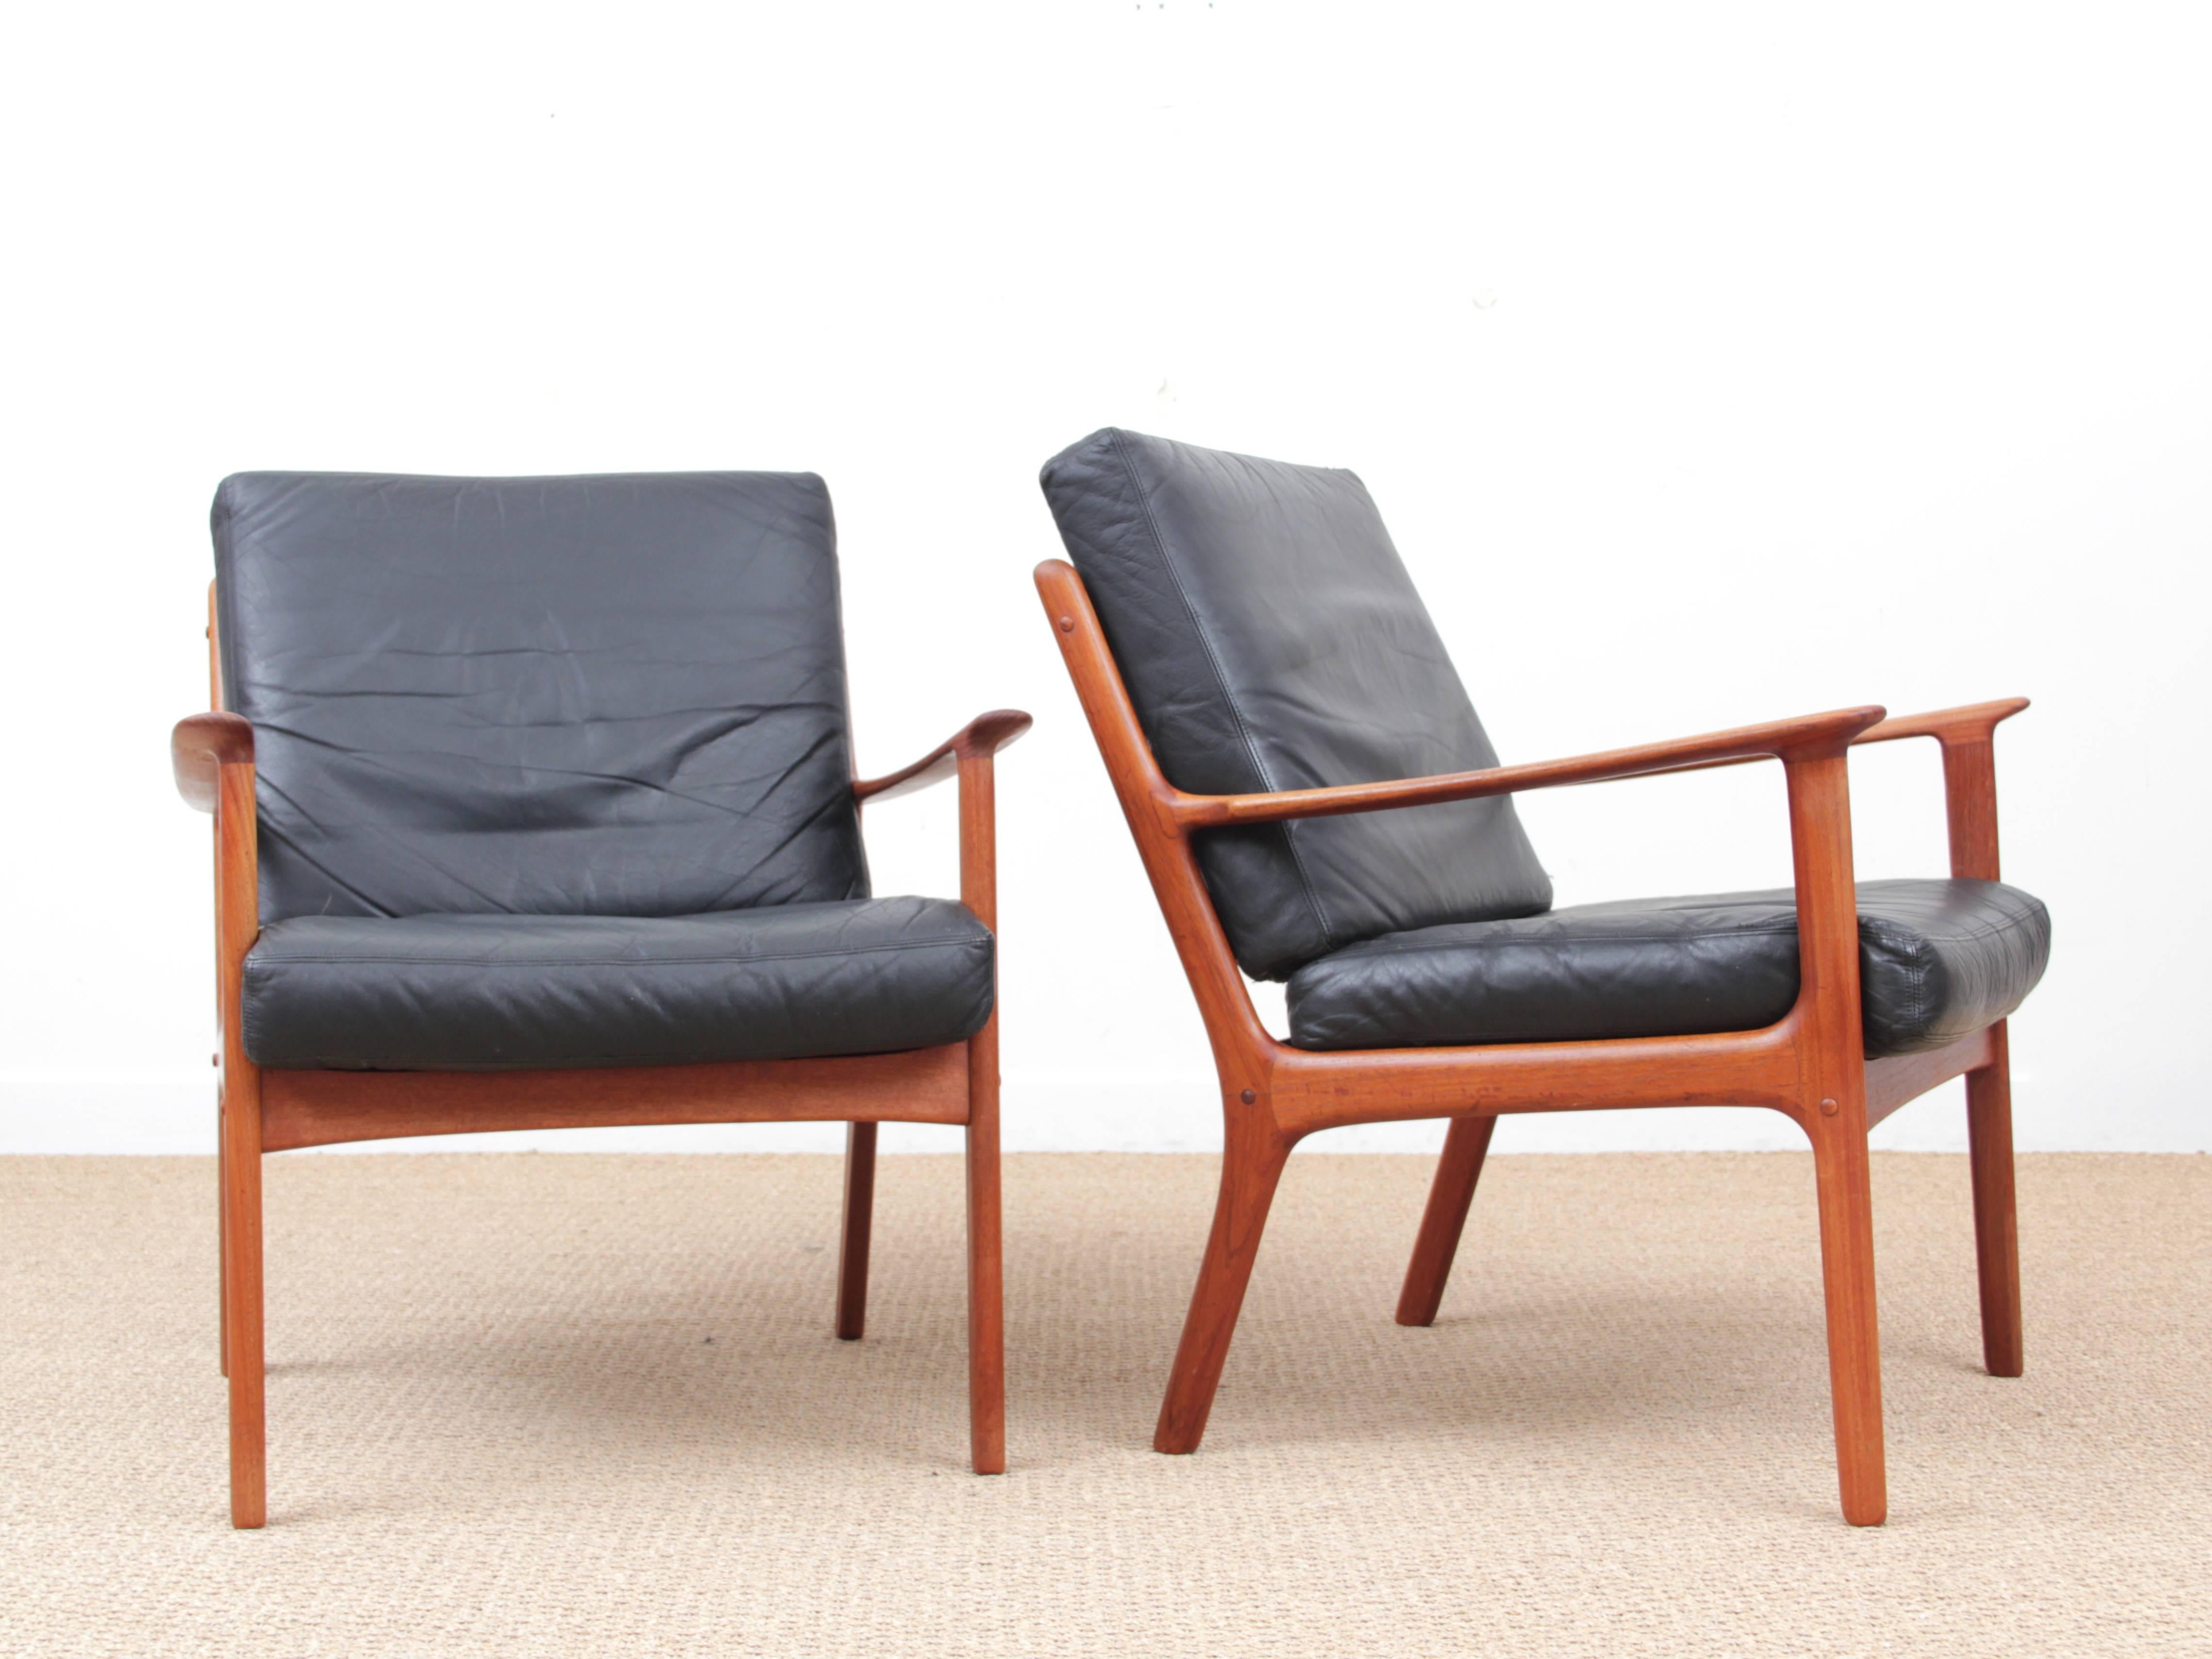 Danish Mid-Century Modern pair of armchairs by Ole Wanscher for Paul Jepesen in solid teak. Original black leather cushions. Referenced by the Design Museum Danmark under number RP02694.